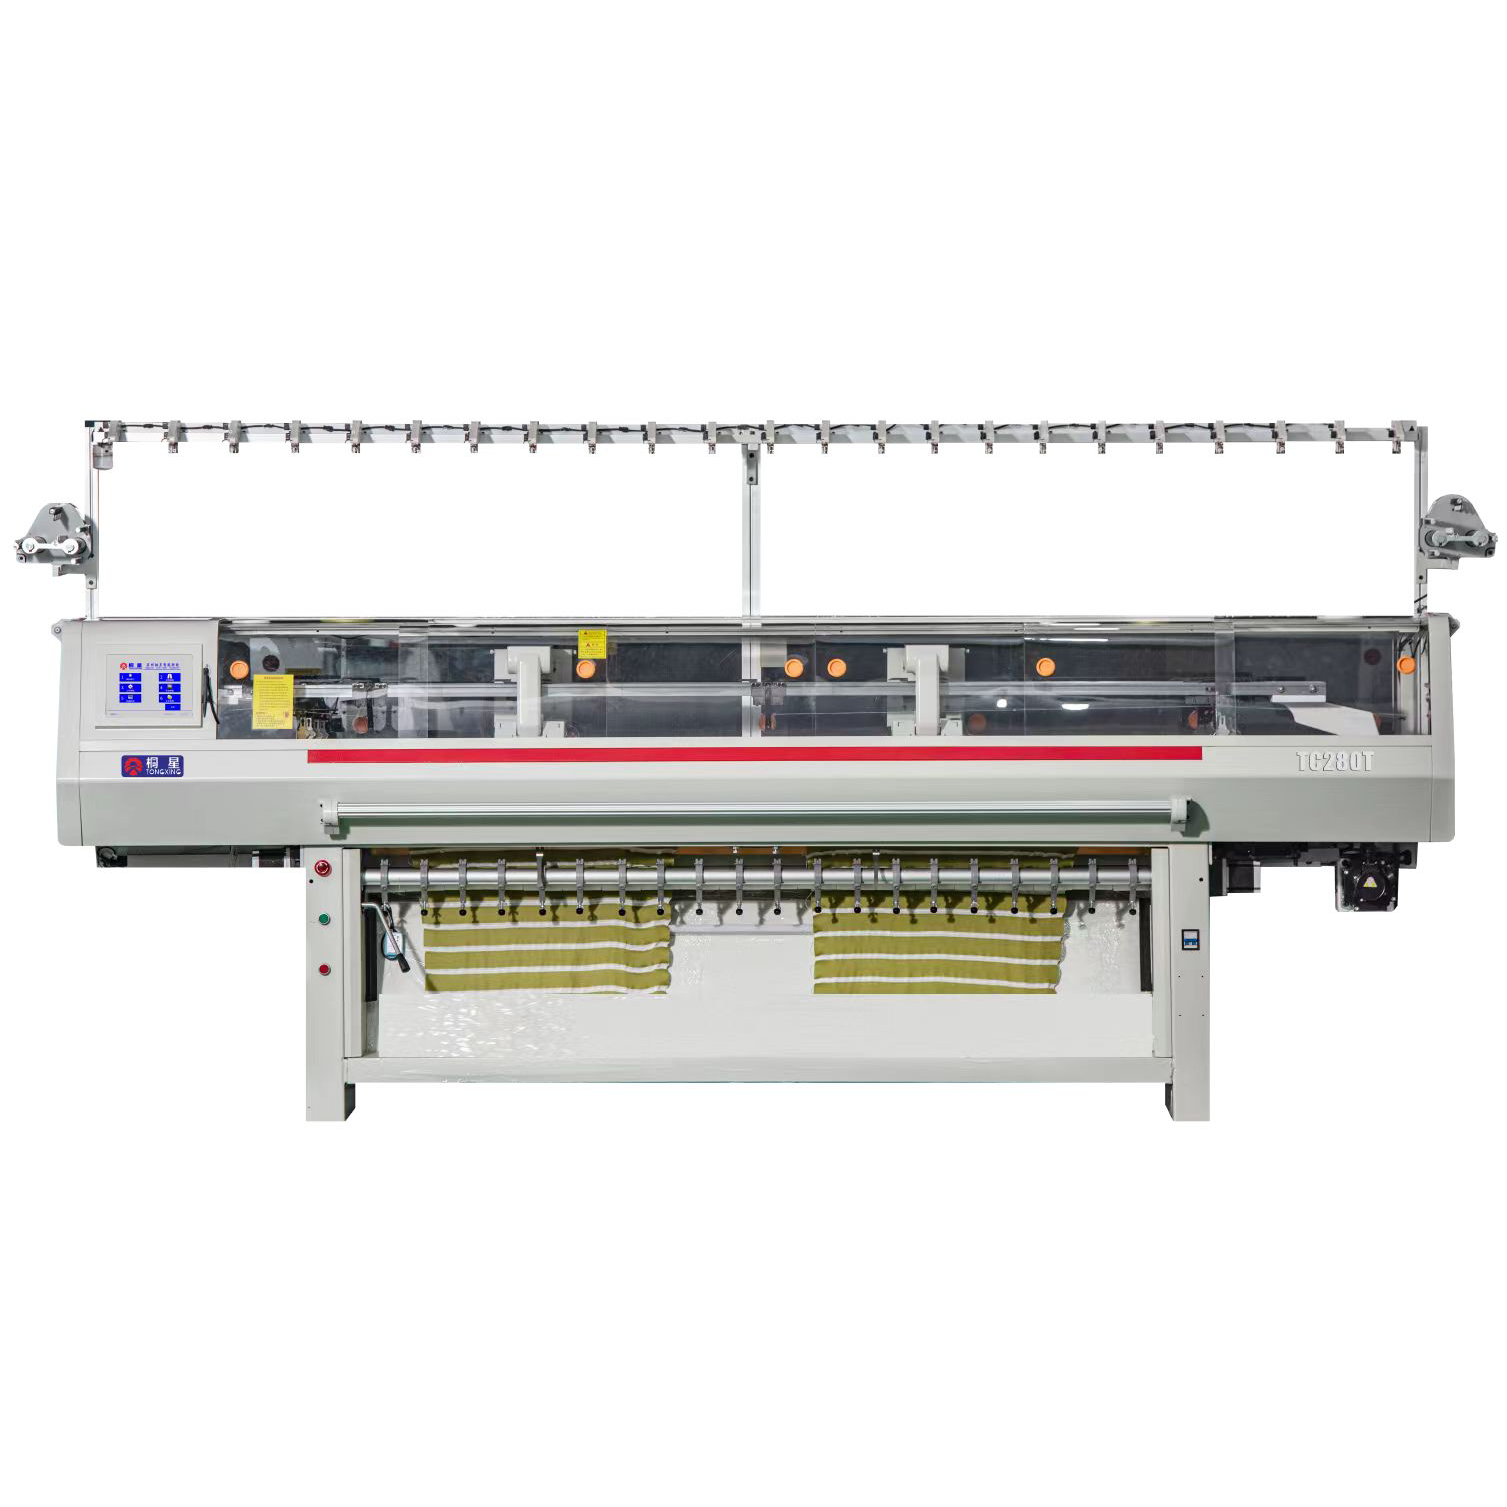 280T Tandem Series Knitting Machine Featured Image